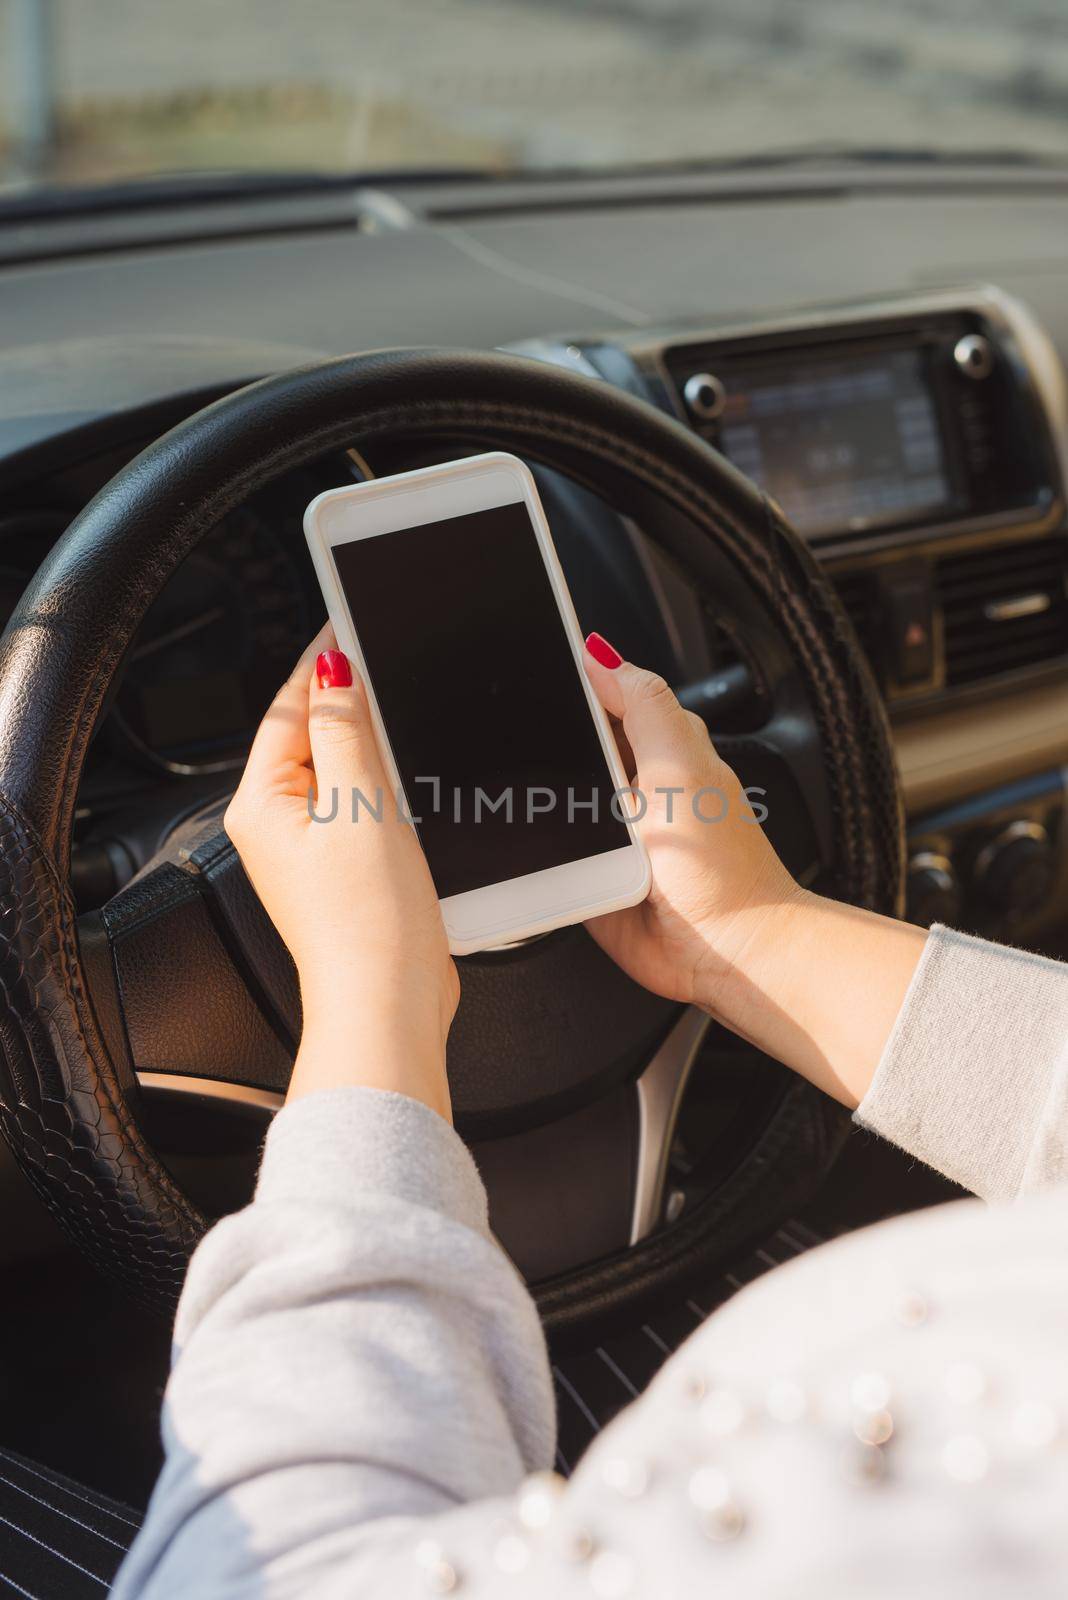 Young female driver using touch screen smartphone and gps navigation in a car.